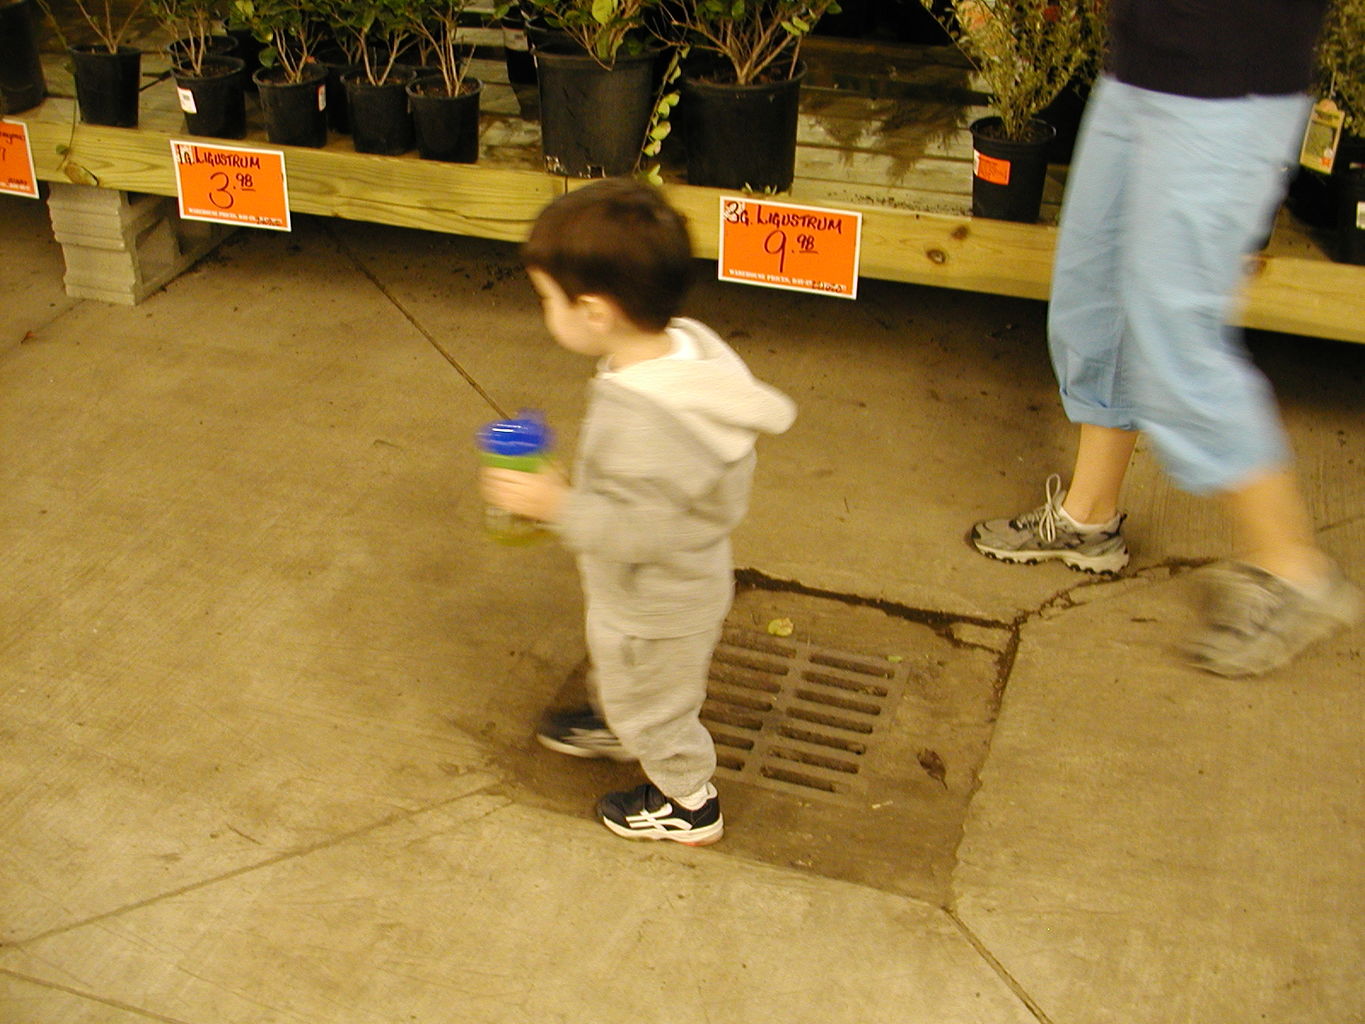 Playtime at the Home Depot
